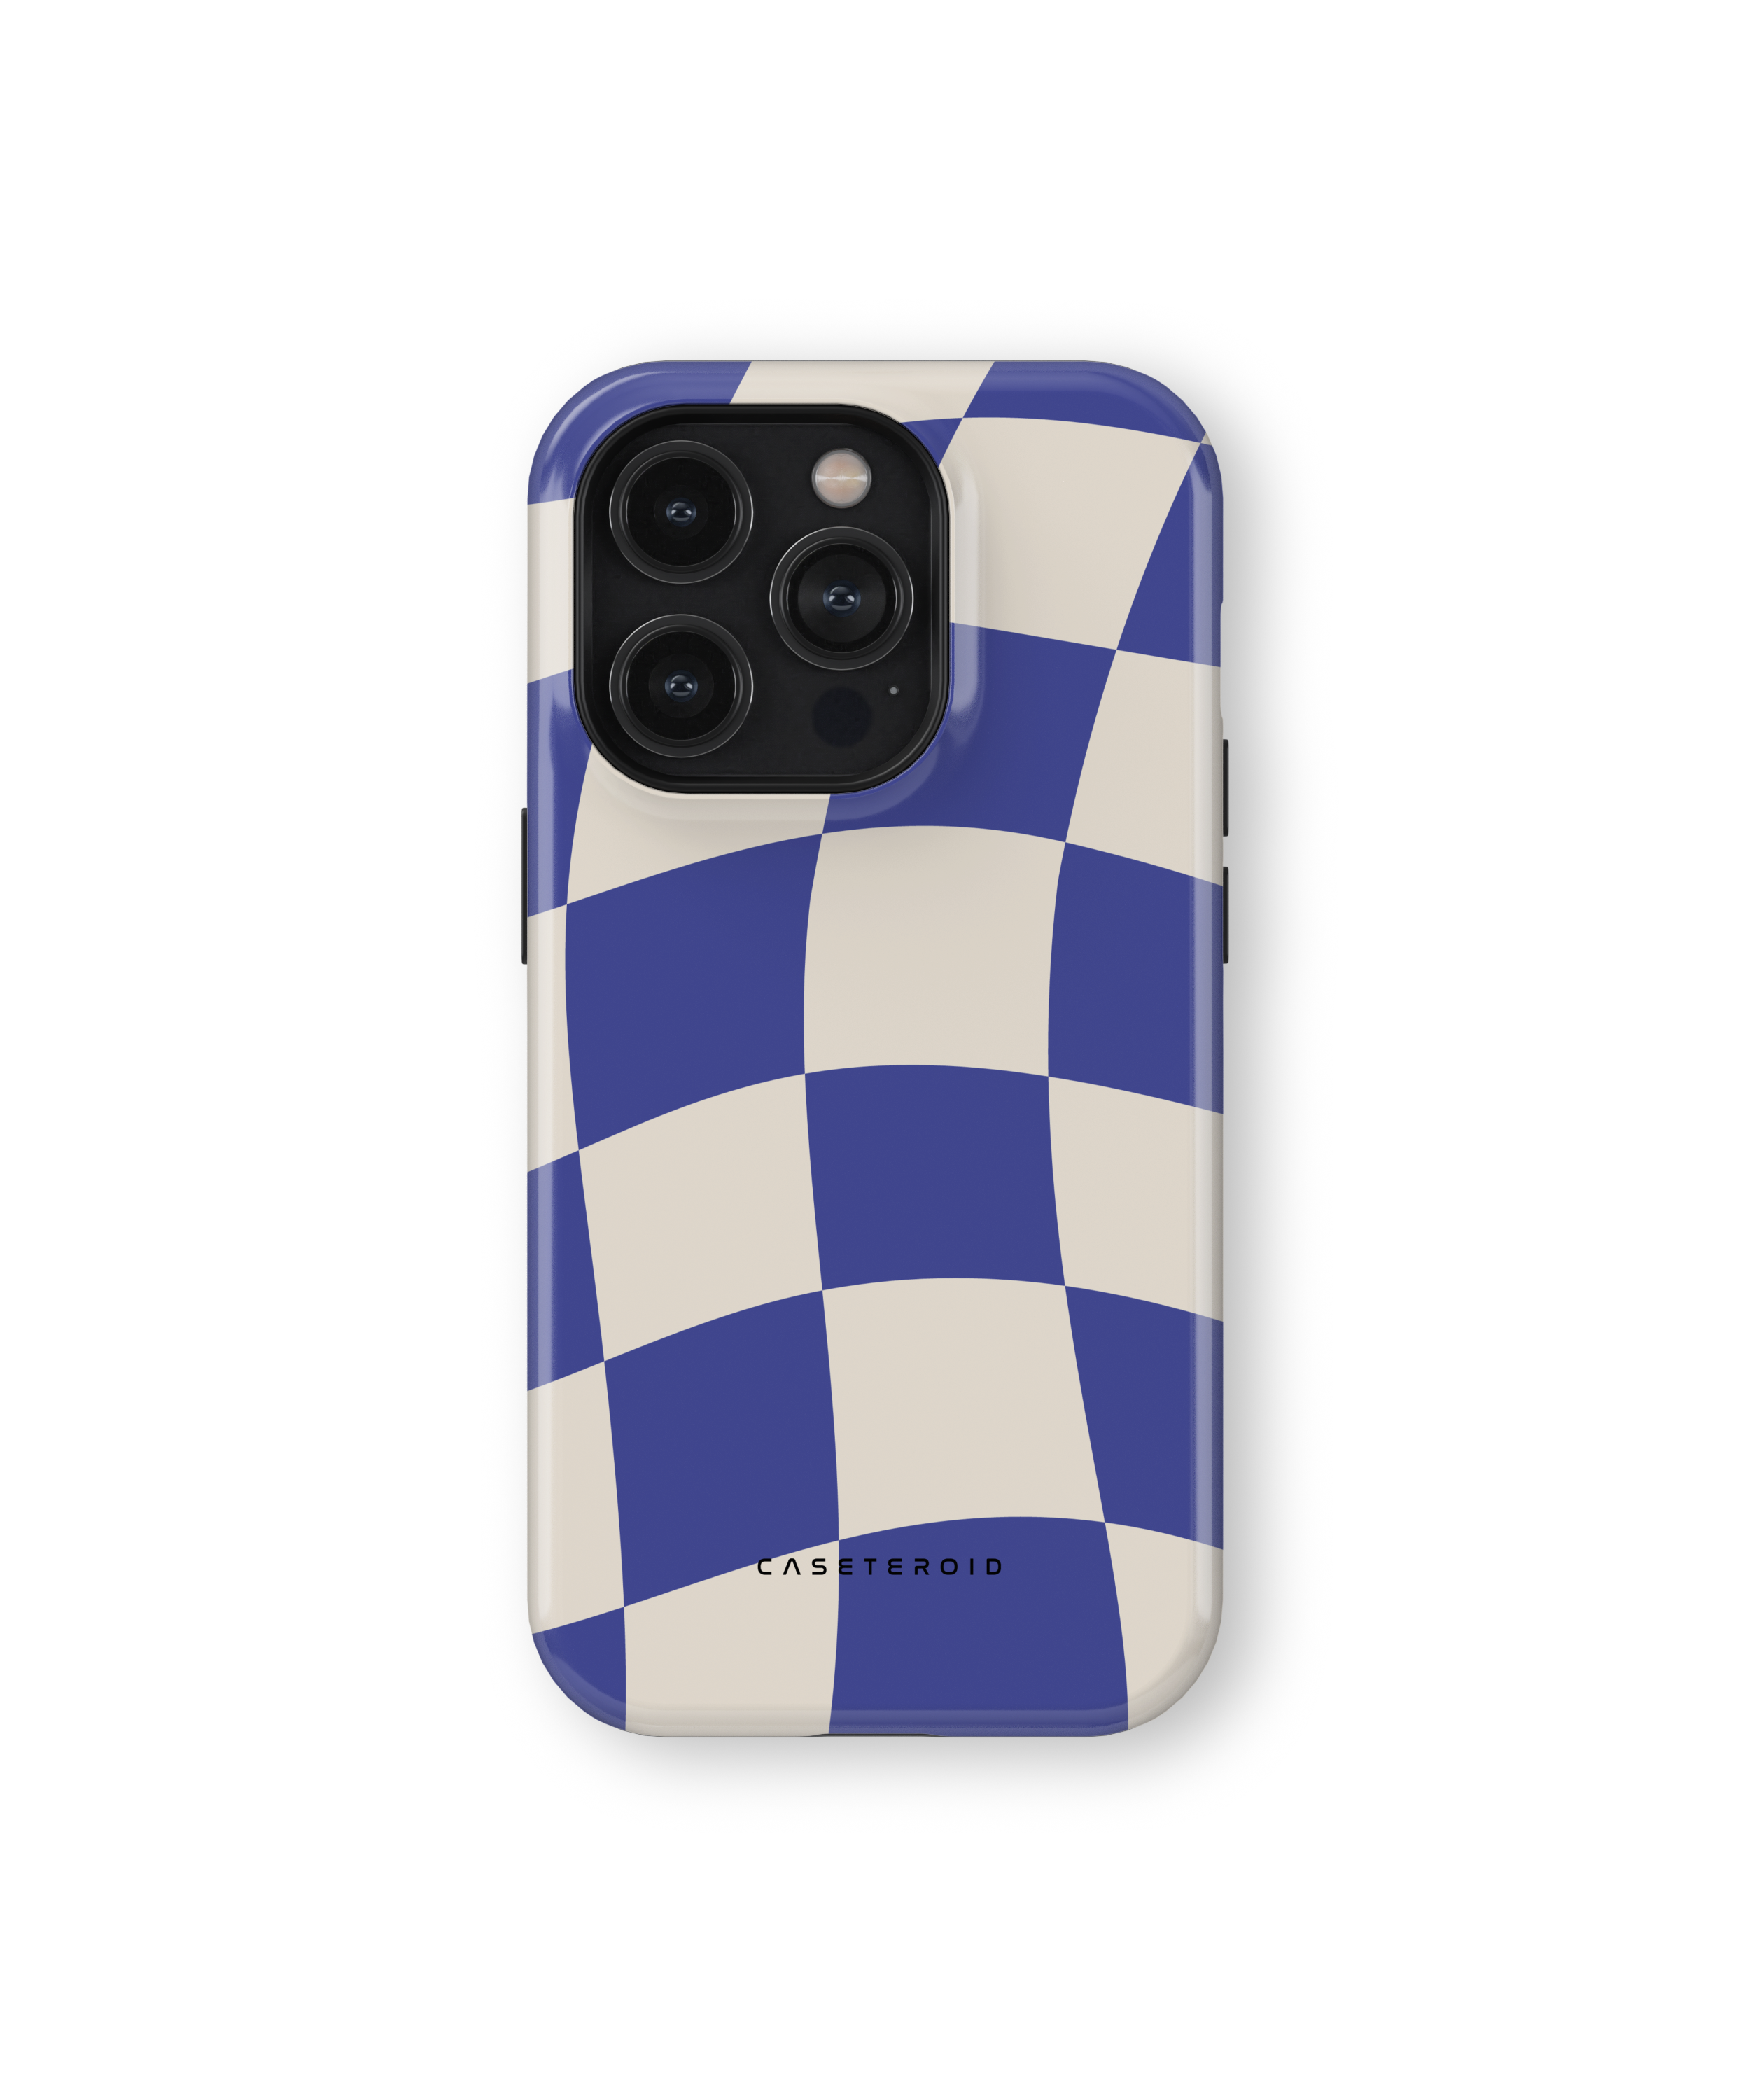 iPhone Tough Case with MagSafe - Azure Checkmate - CASETEROID